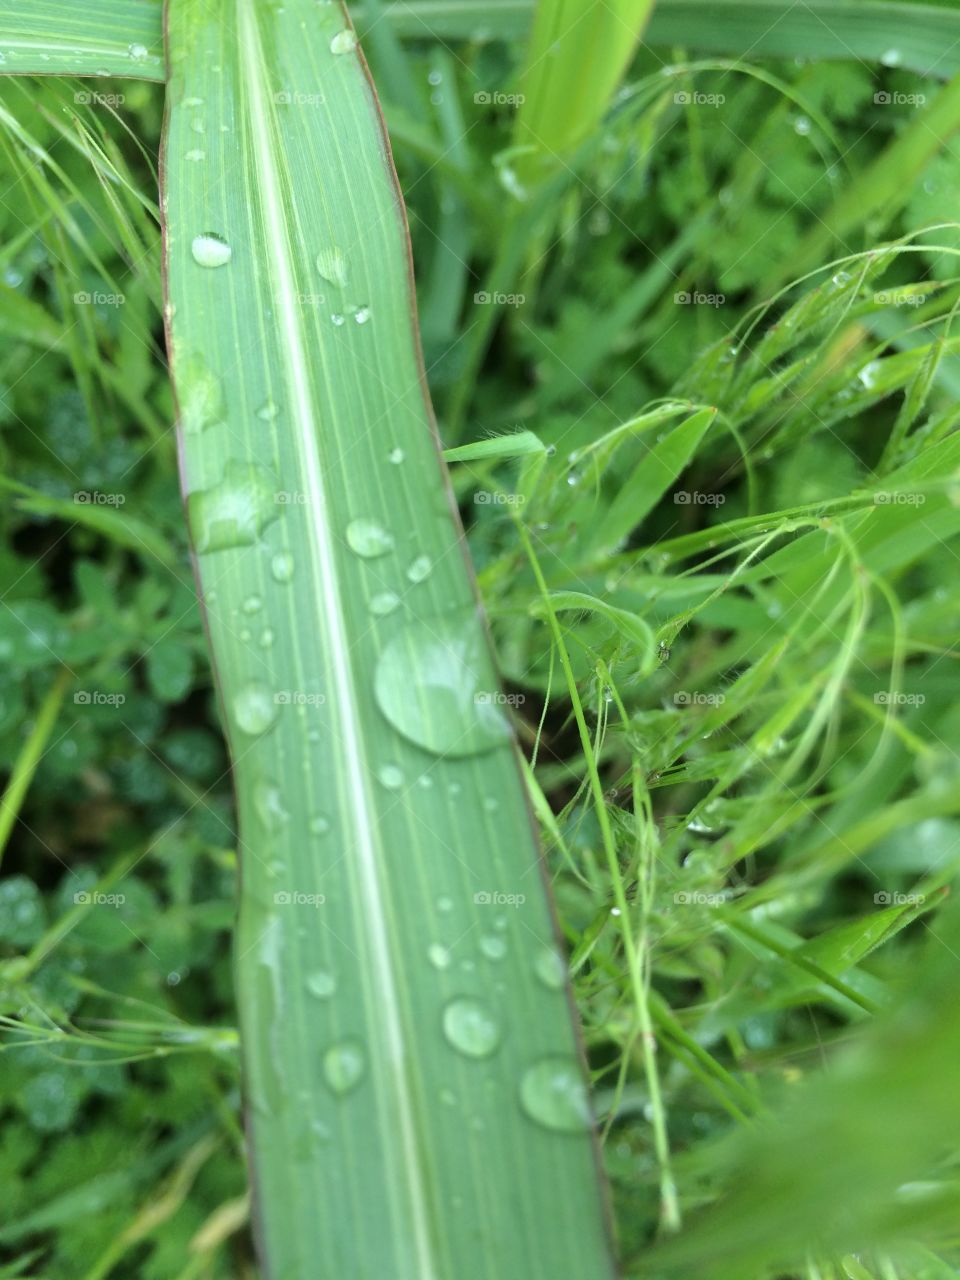 Spring raindrop captured on a blade of grass